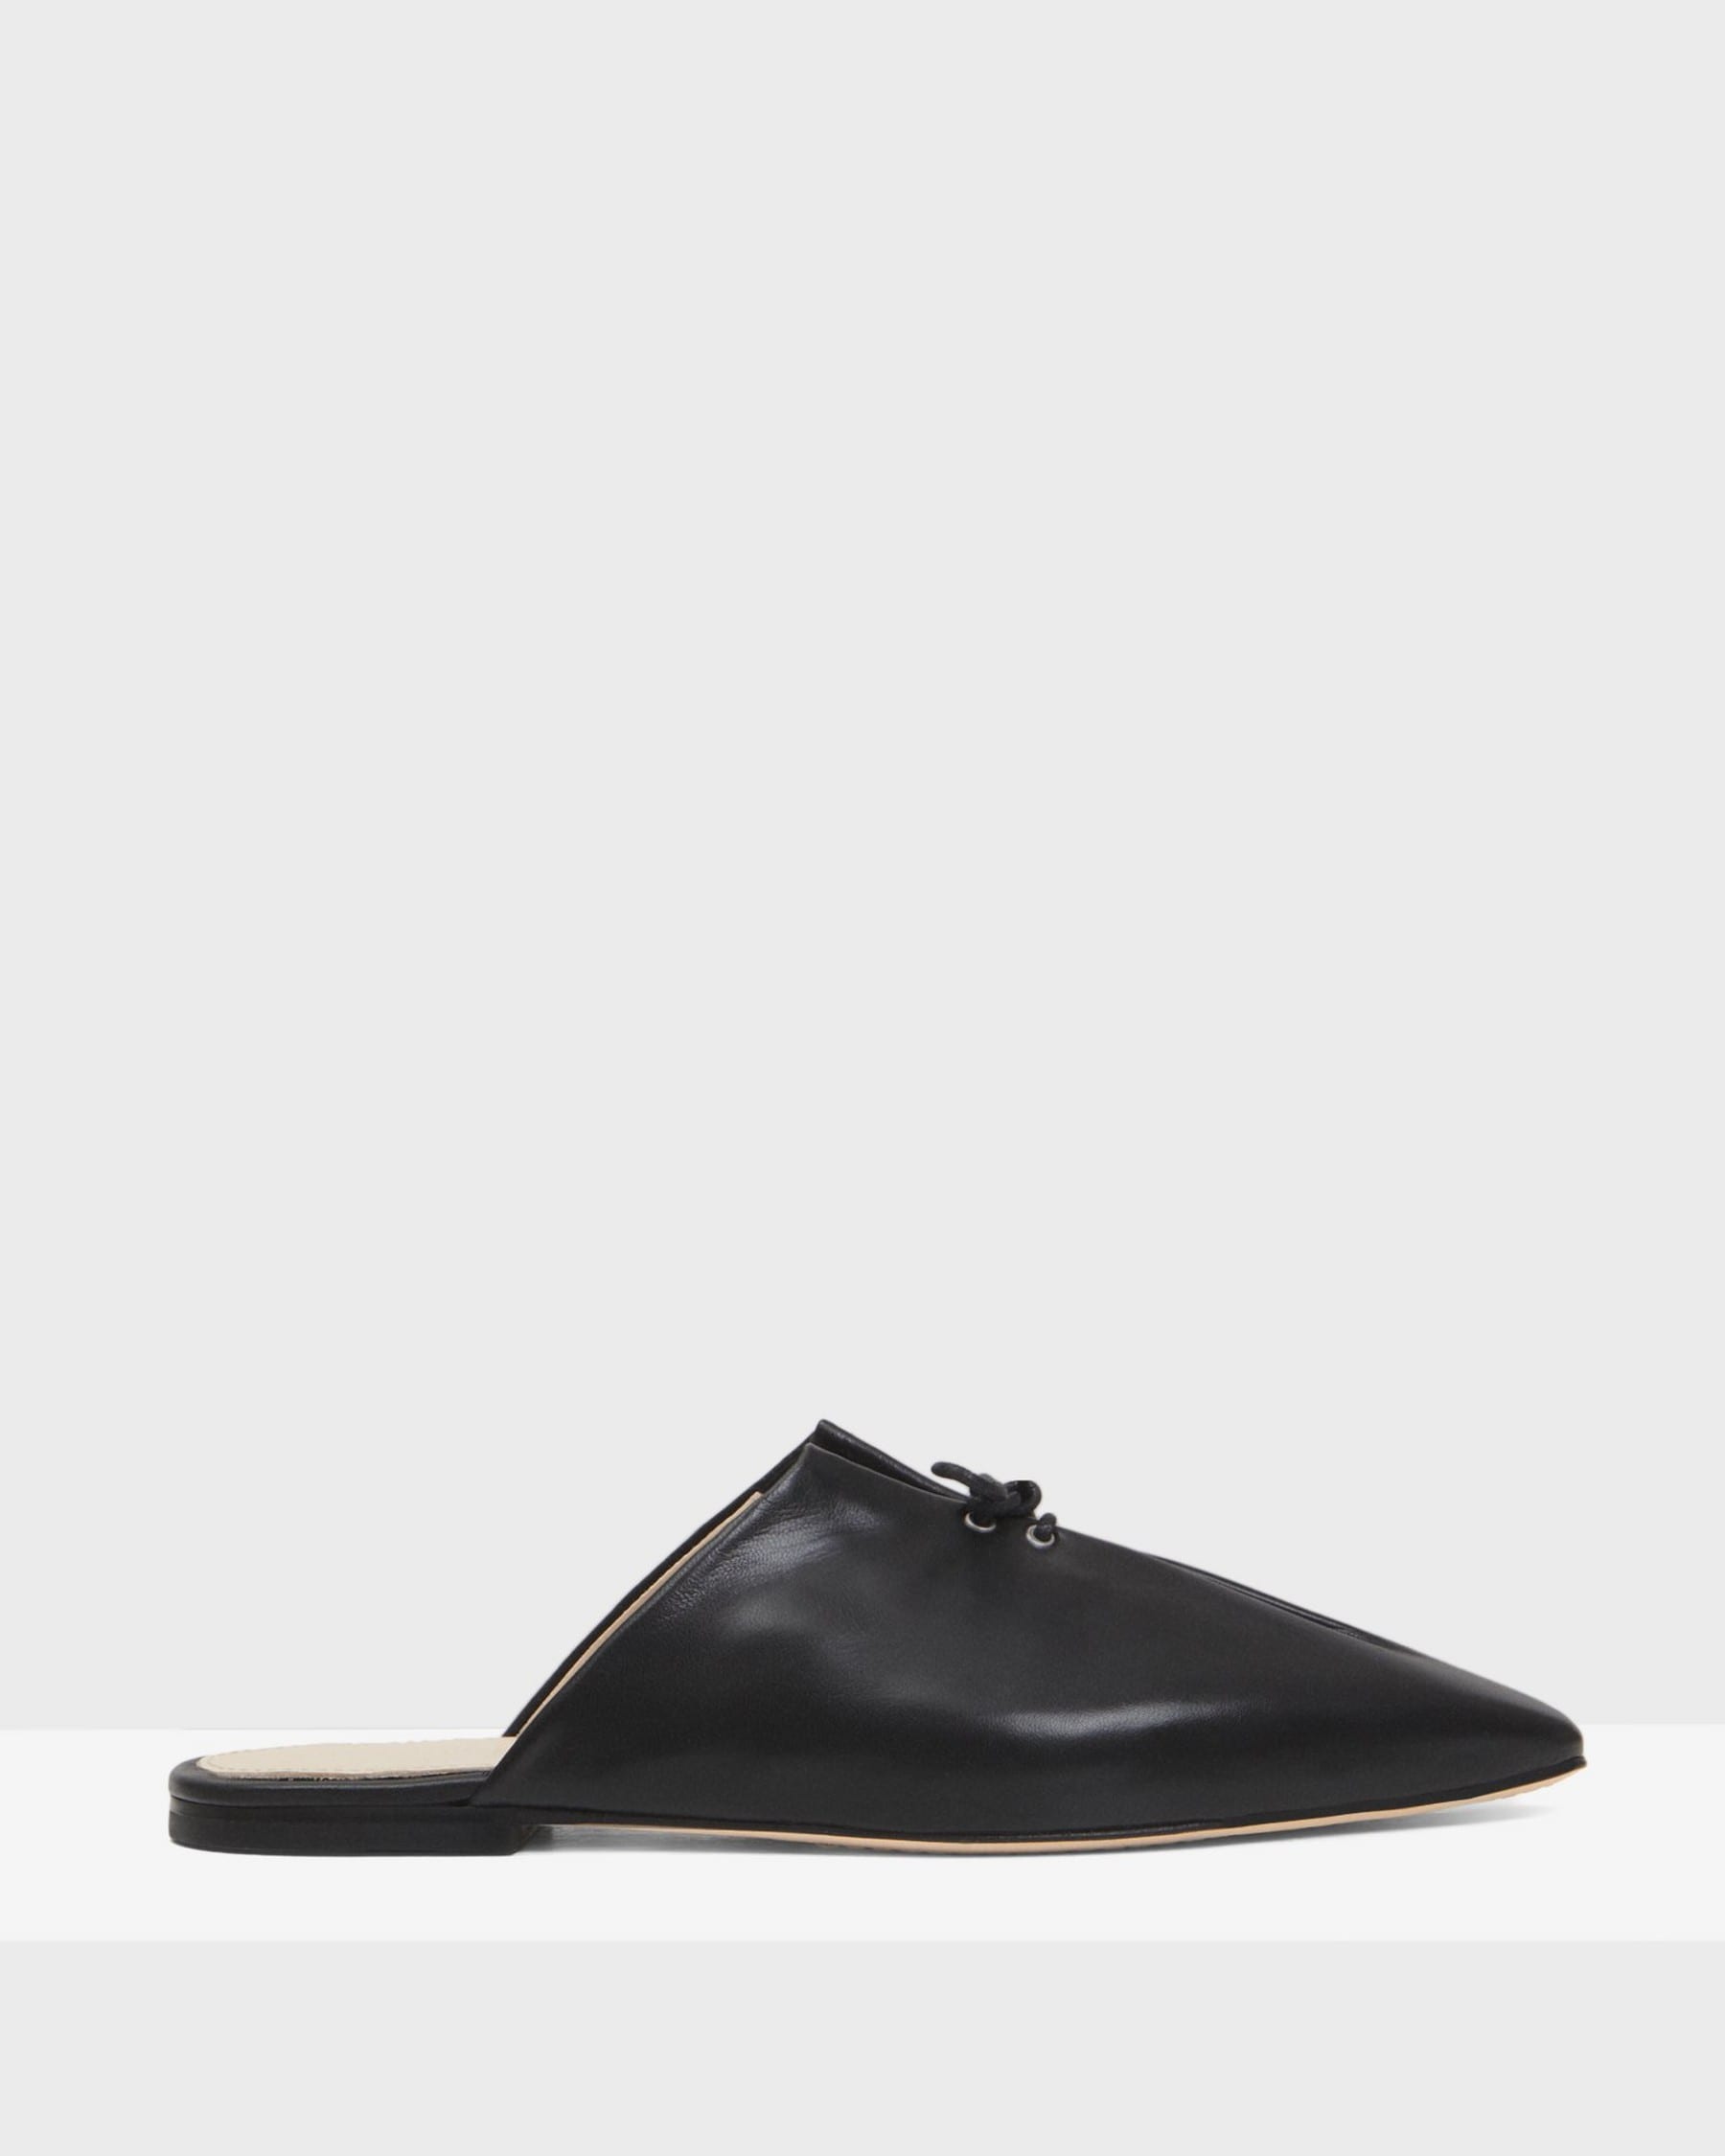 theory.com | Pleated Mule in Leather